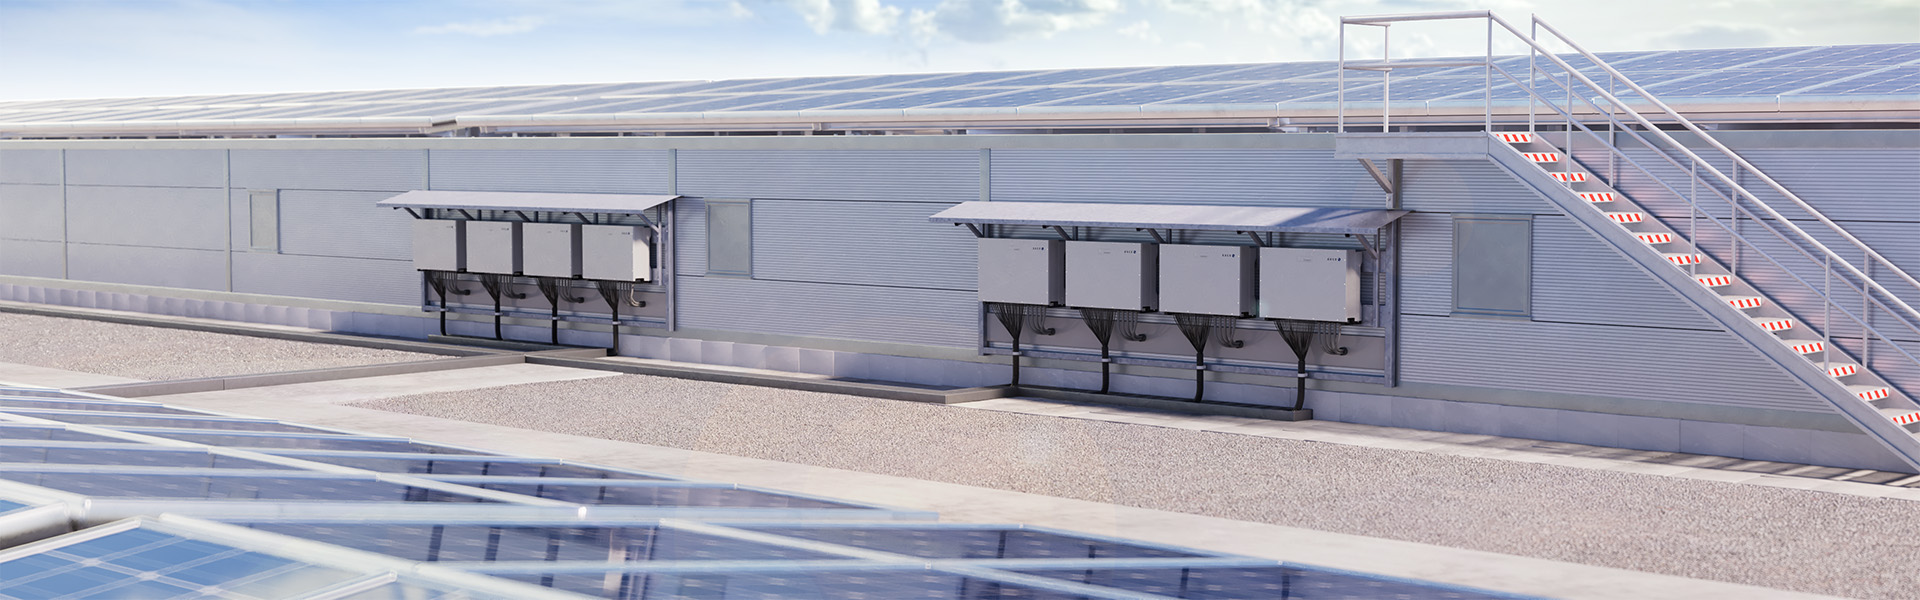 Header Commercial PV Flat Roof